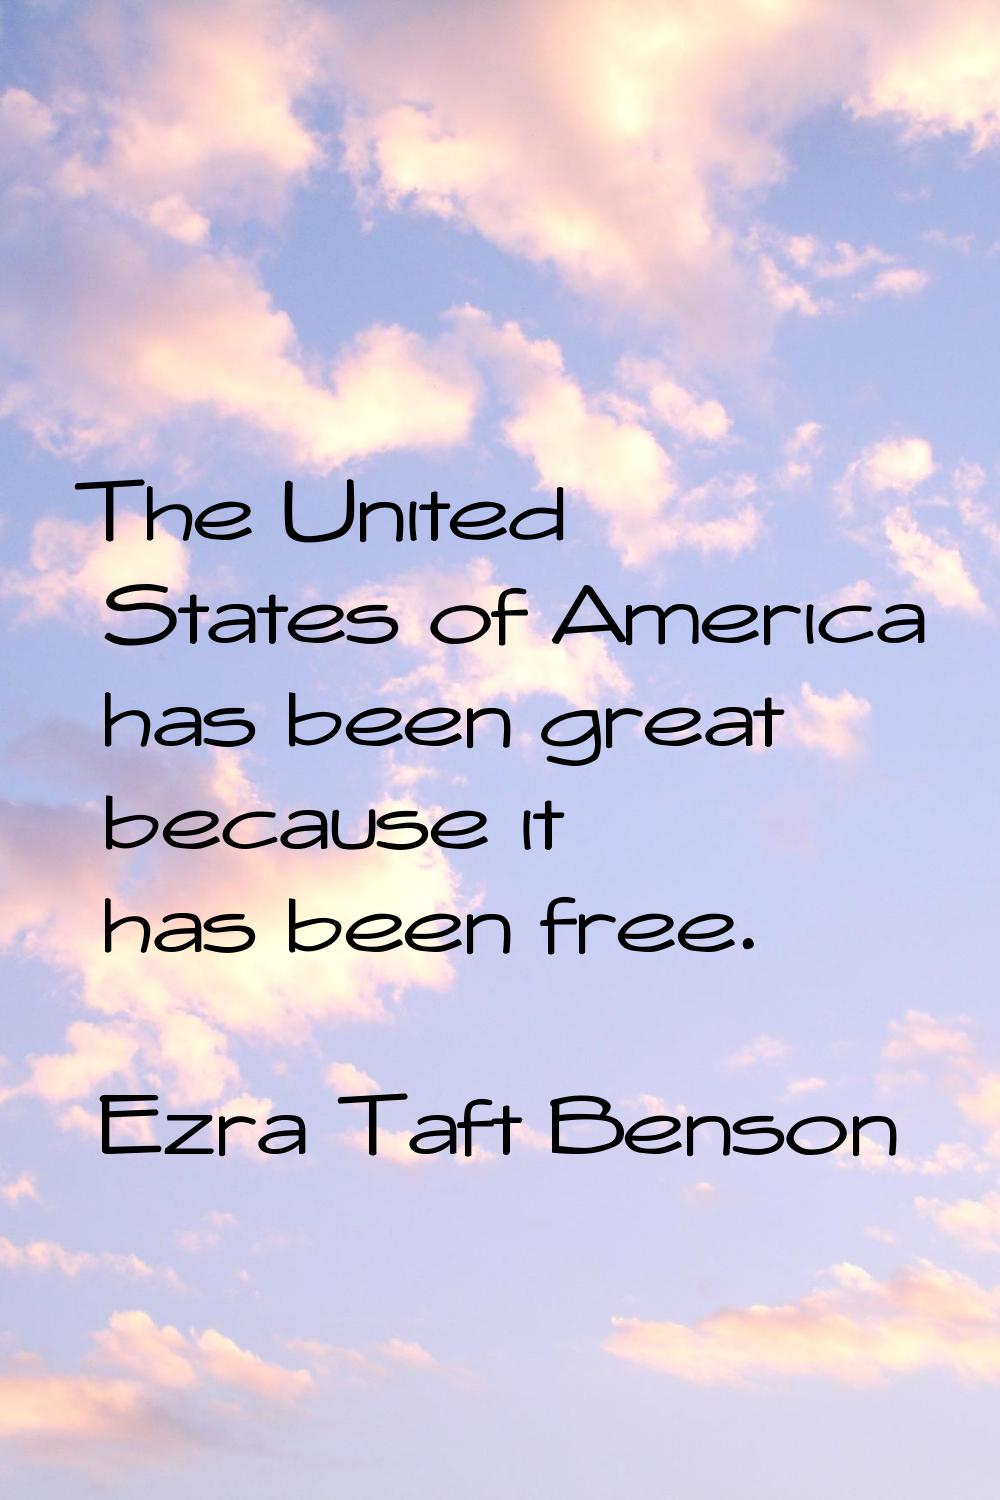 The United States of America has been great because it has been free.